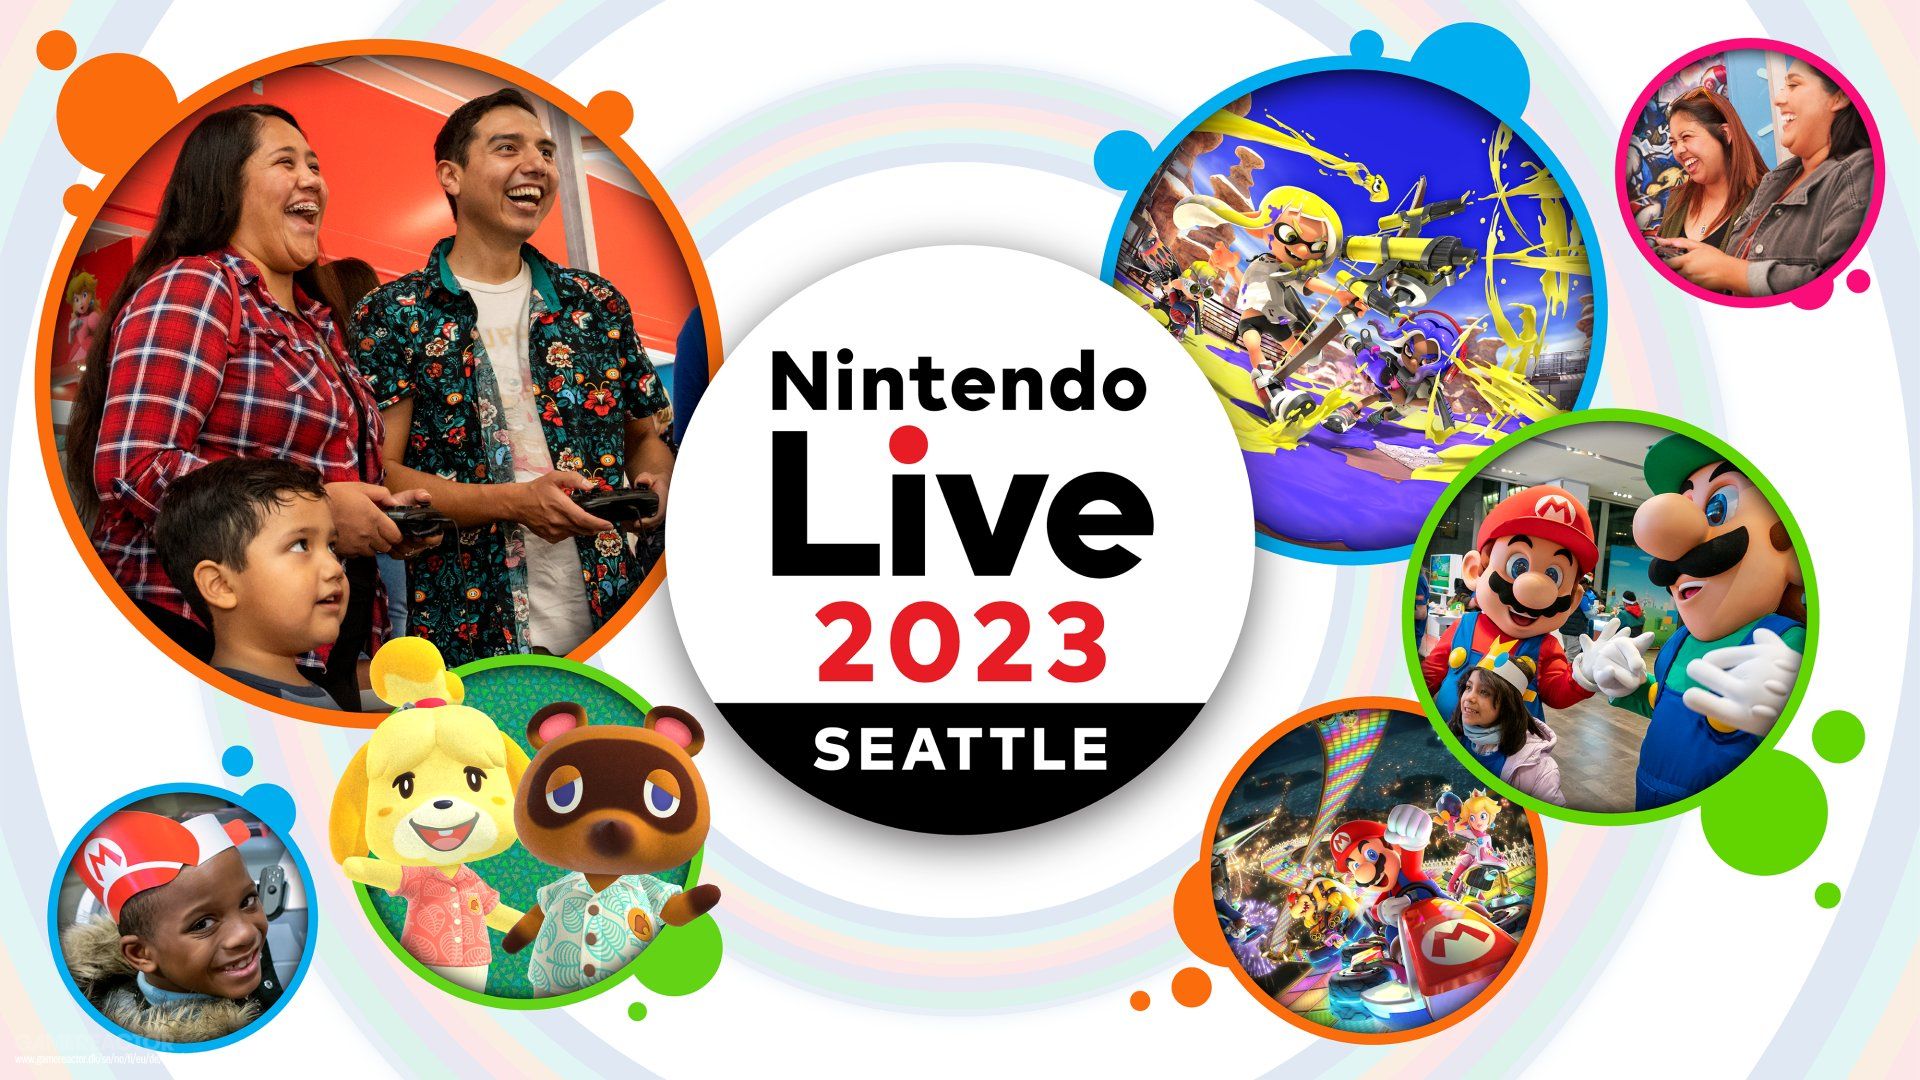 Nintendo Live 2023, a new face-to-face event to be held in Seattle in September